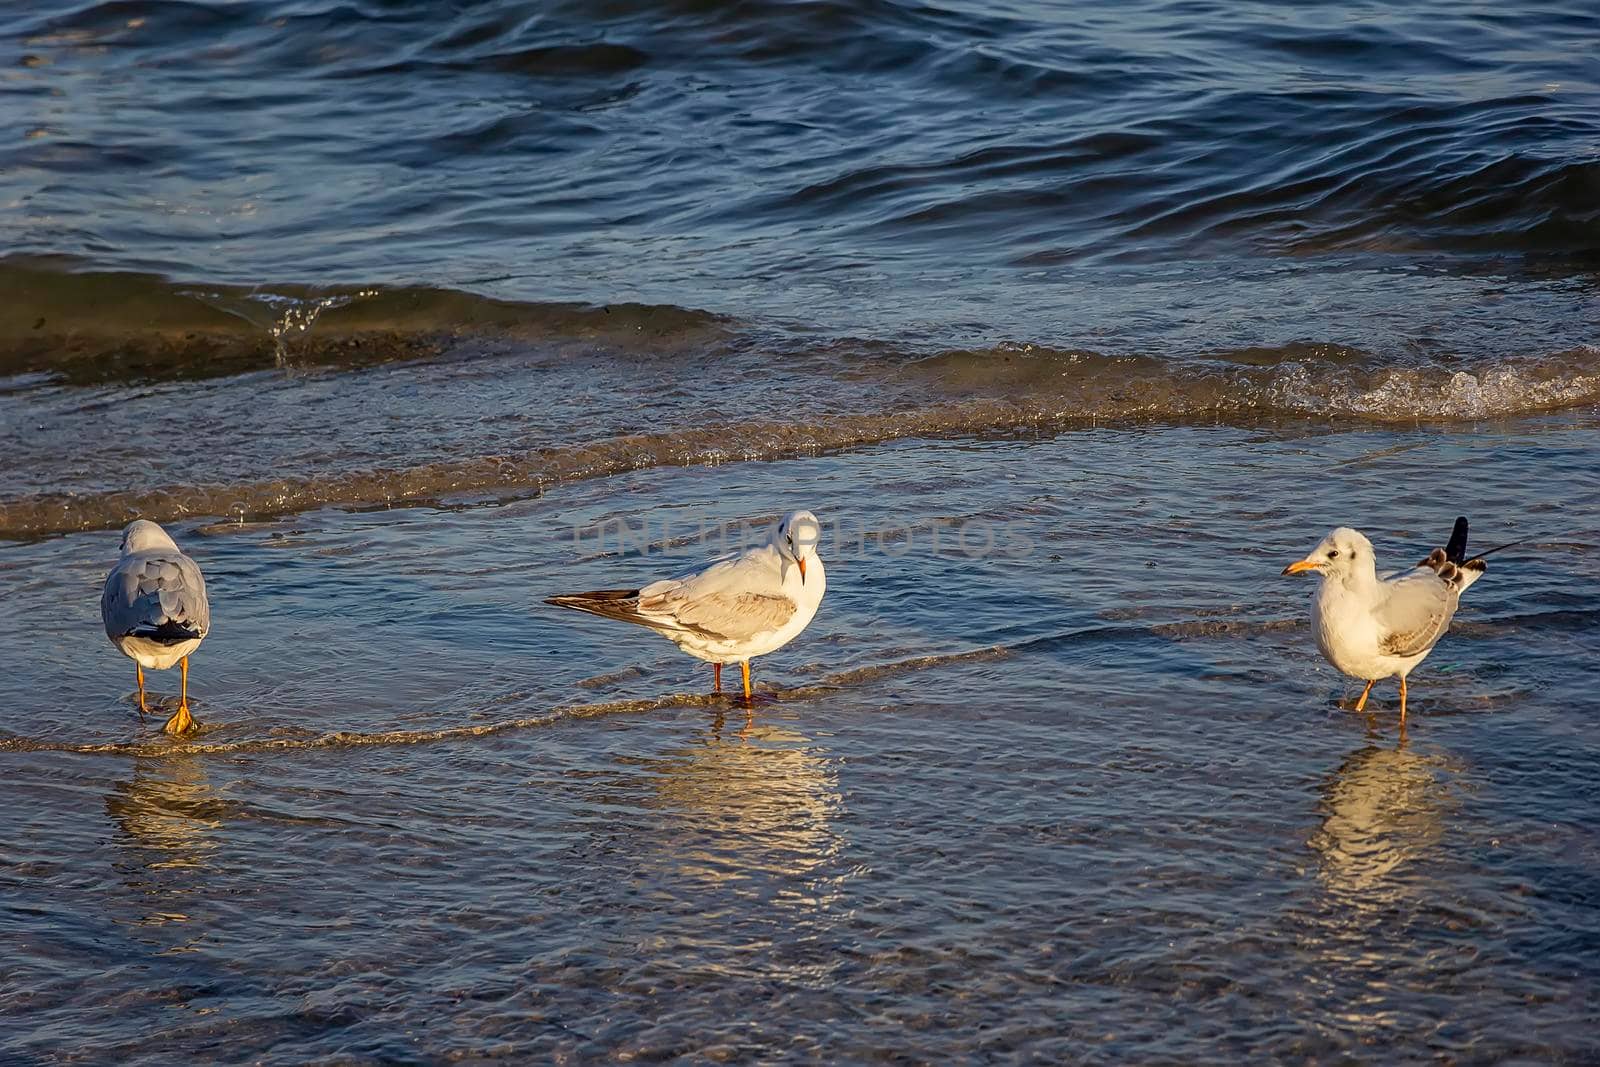 Seagulls standing in the water on sea shore.